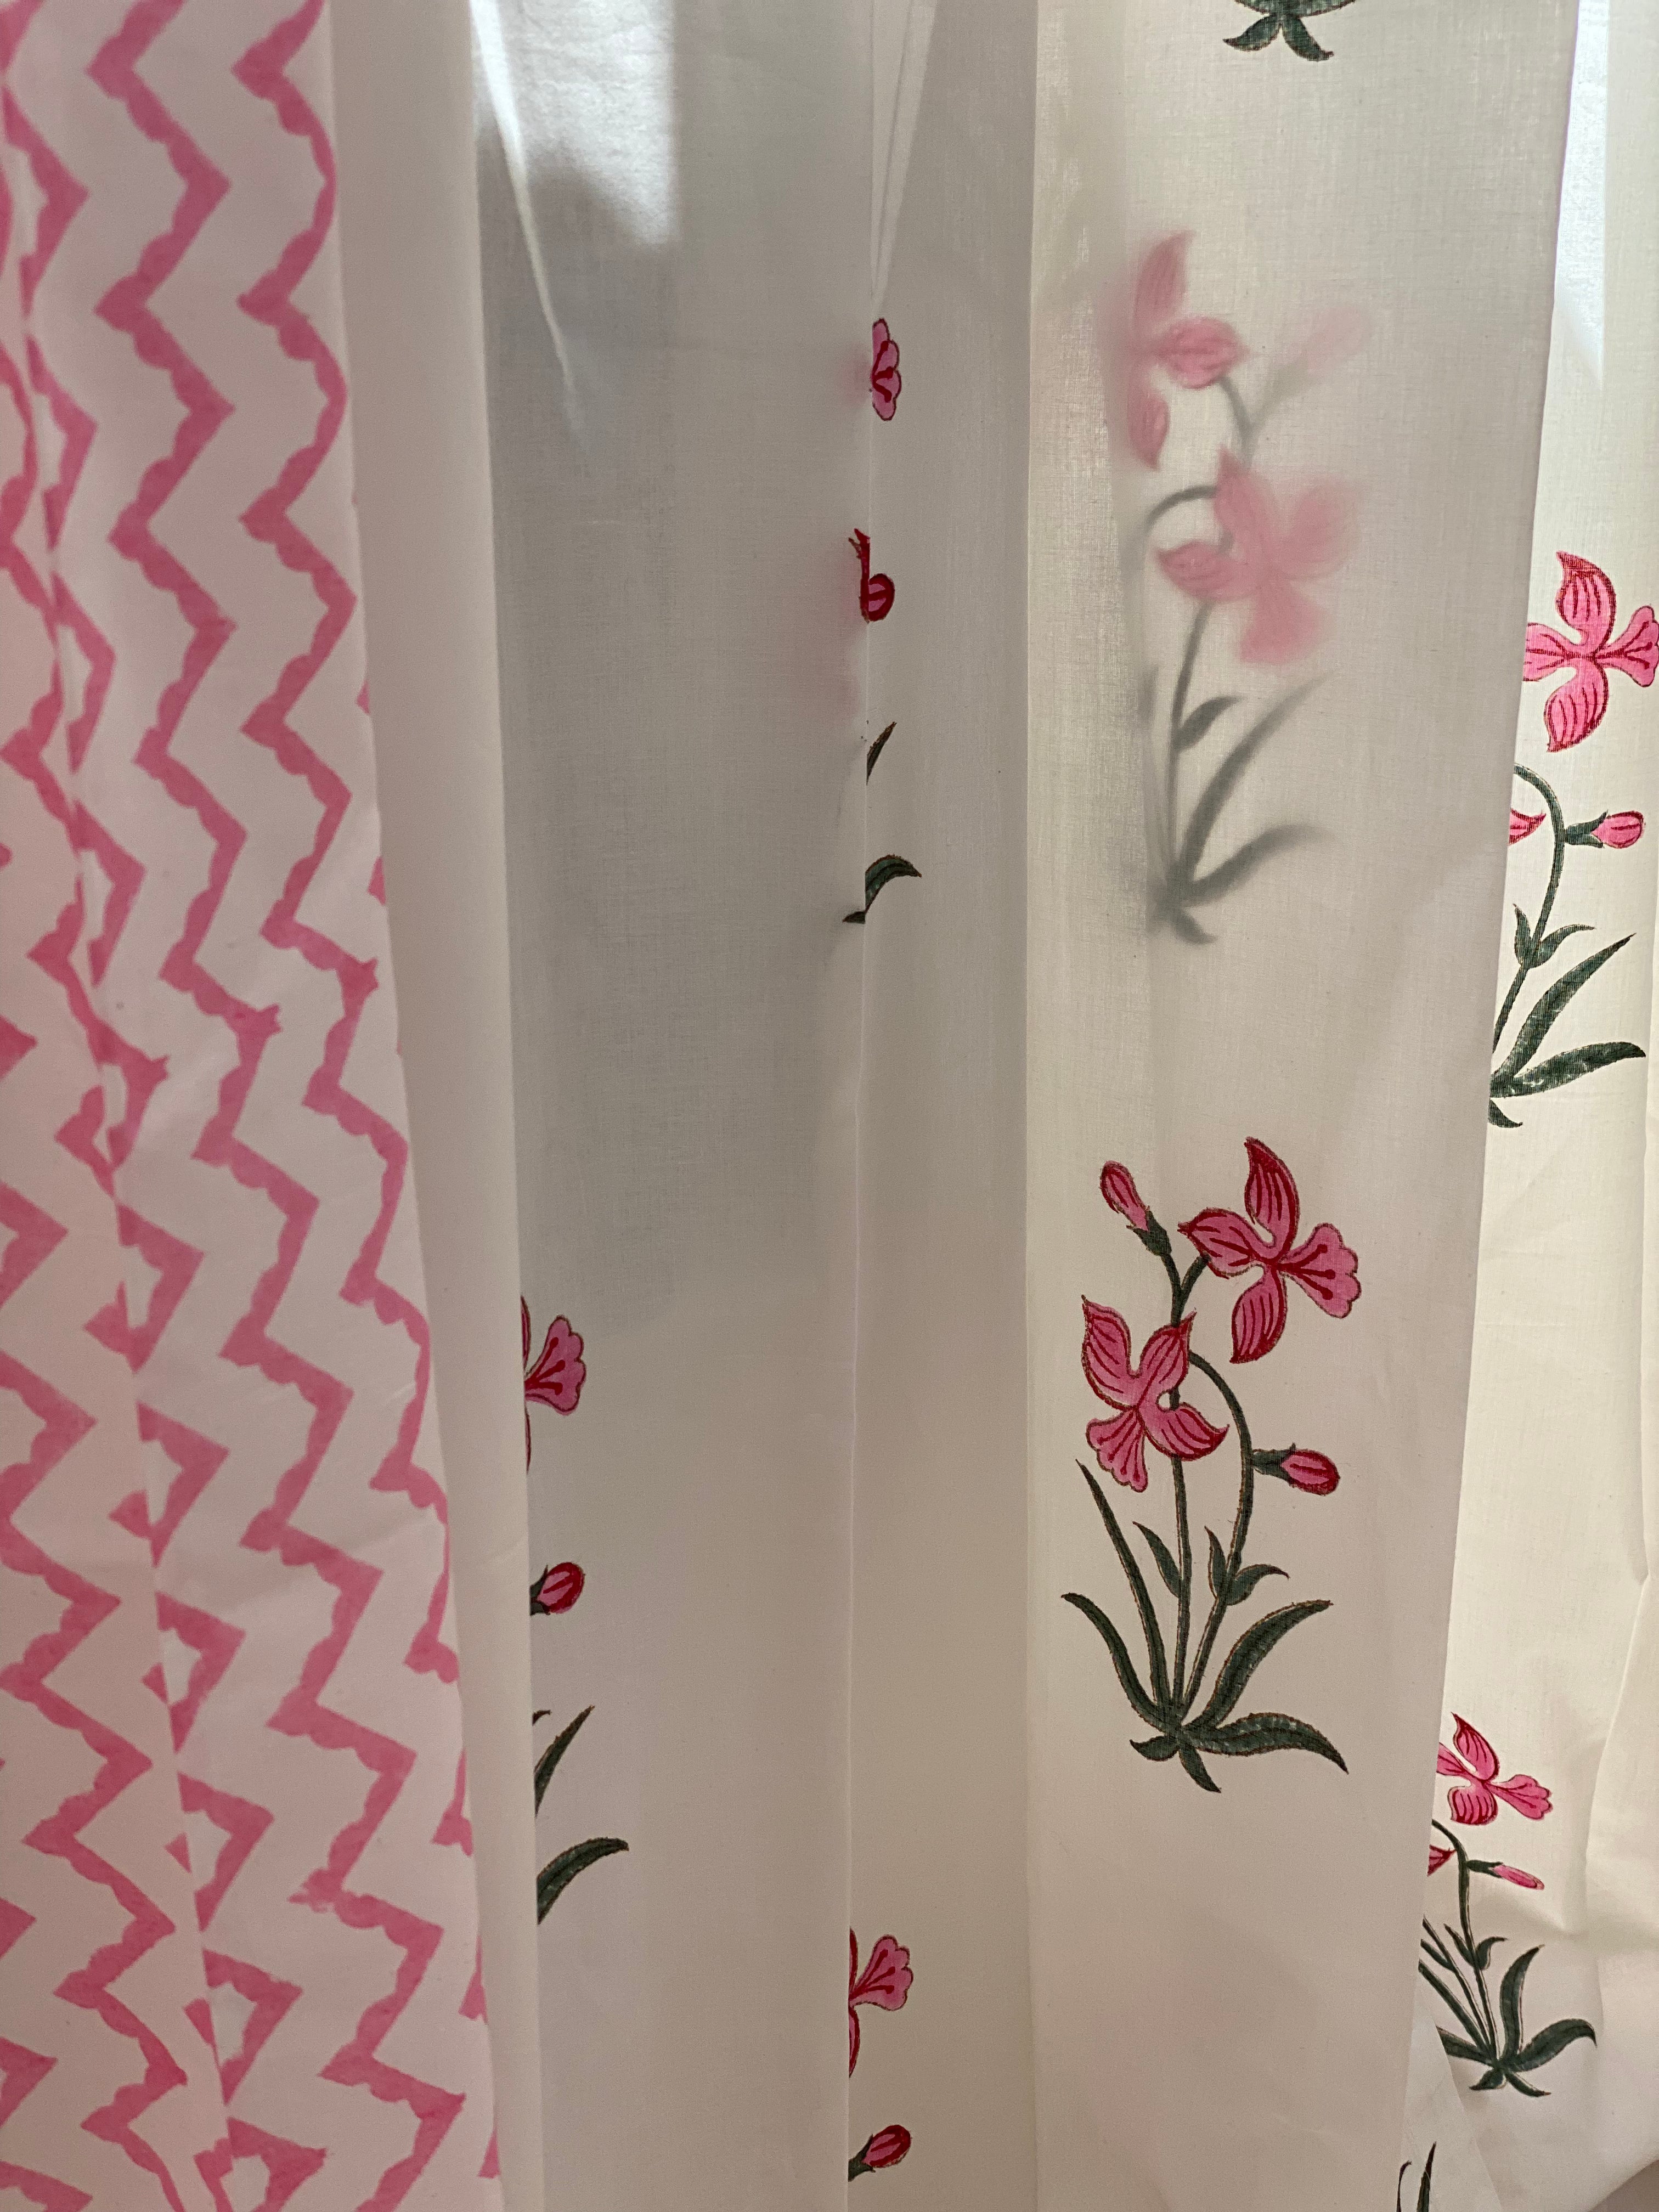 Set of 4 Hand Block Printed Cotton Curtain